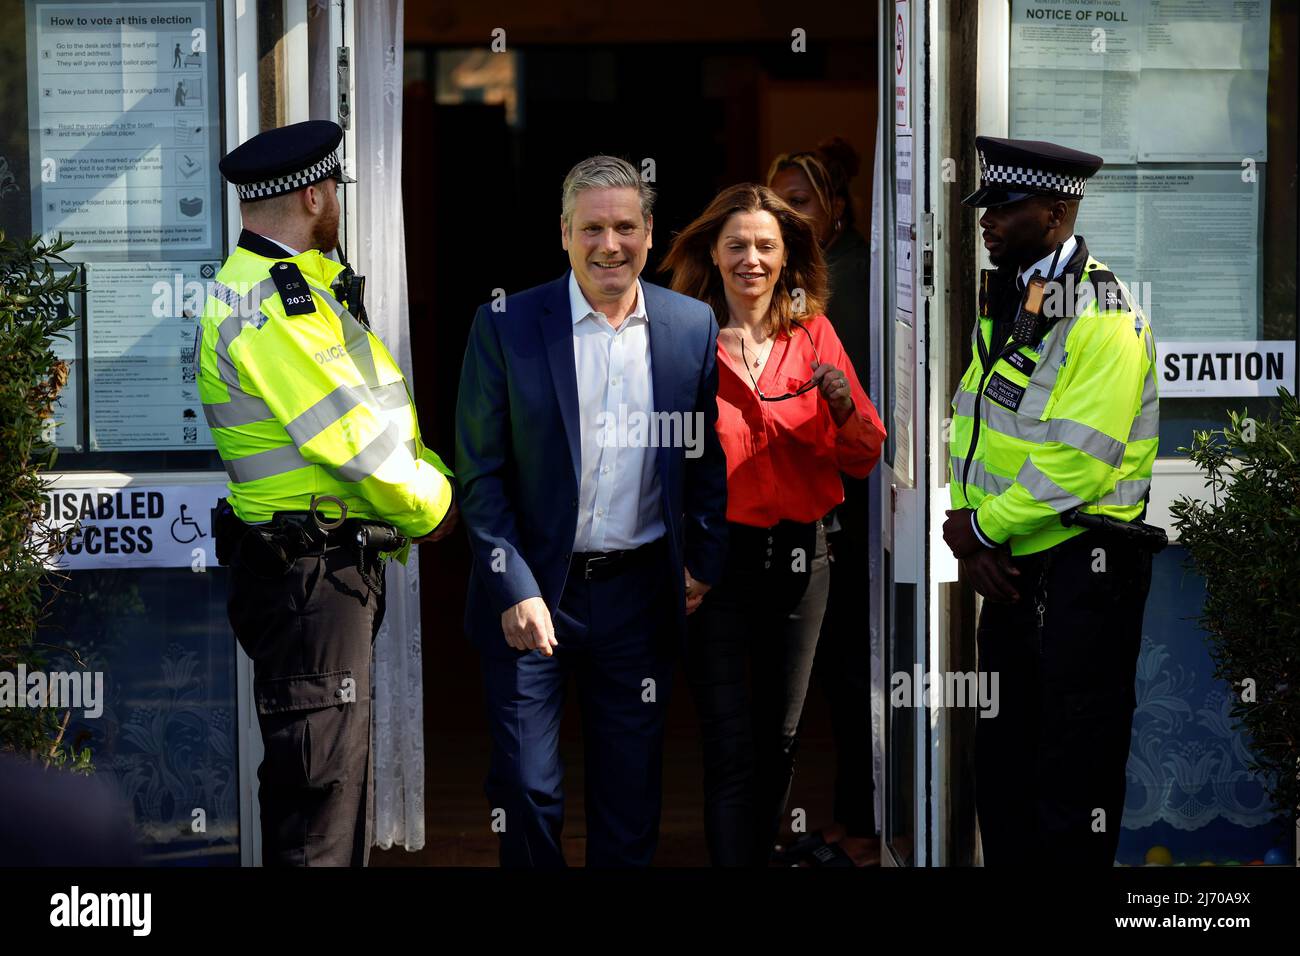 British Labour Party leader Keir Starmer and wife Victoria Starmer walk outside a polling station during the local elections in Kentish Town, London, Britain May 5, 2022. REUTERS/John Sibley Stock Photo